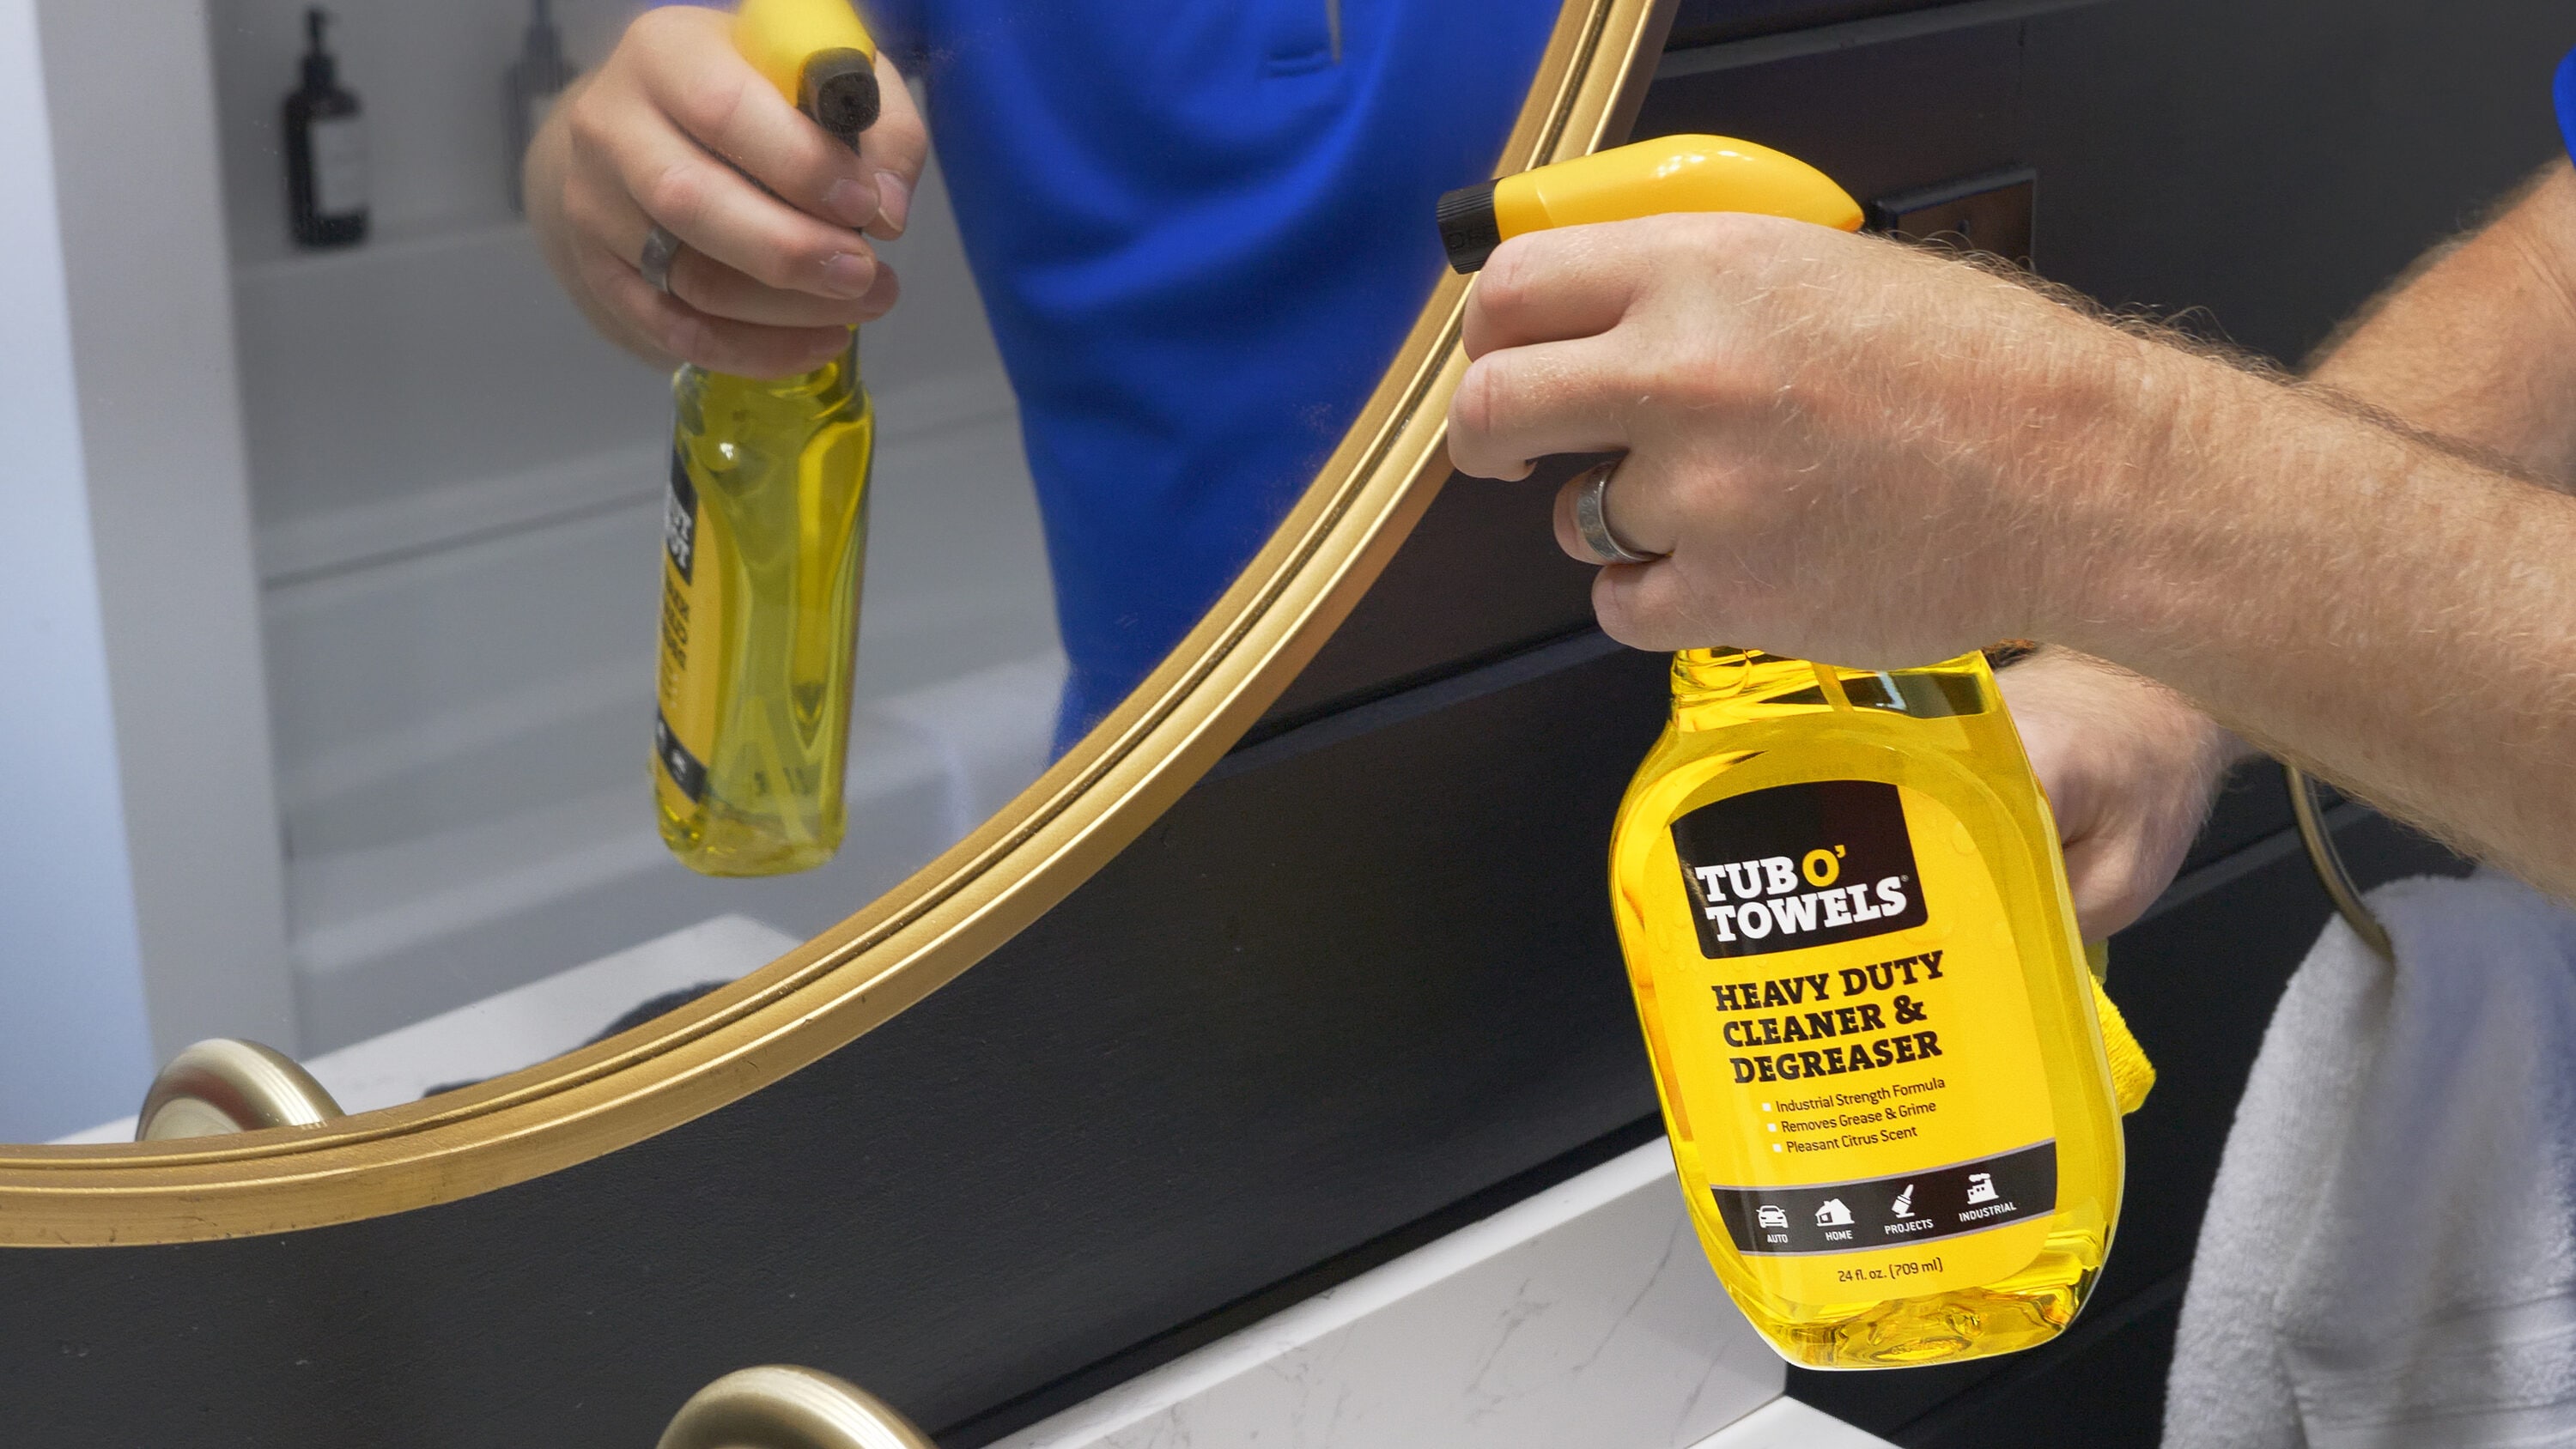 New Tub O' Towels spray delivers degreasing power